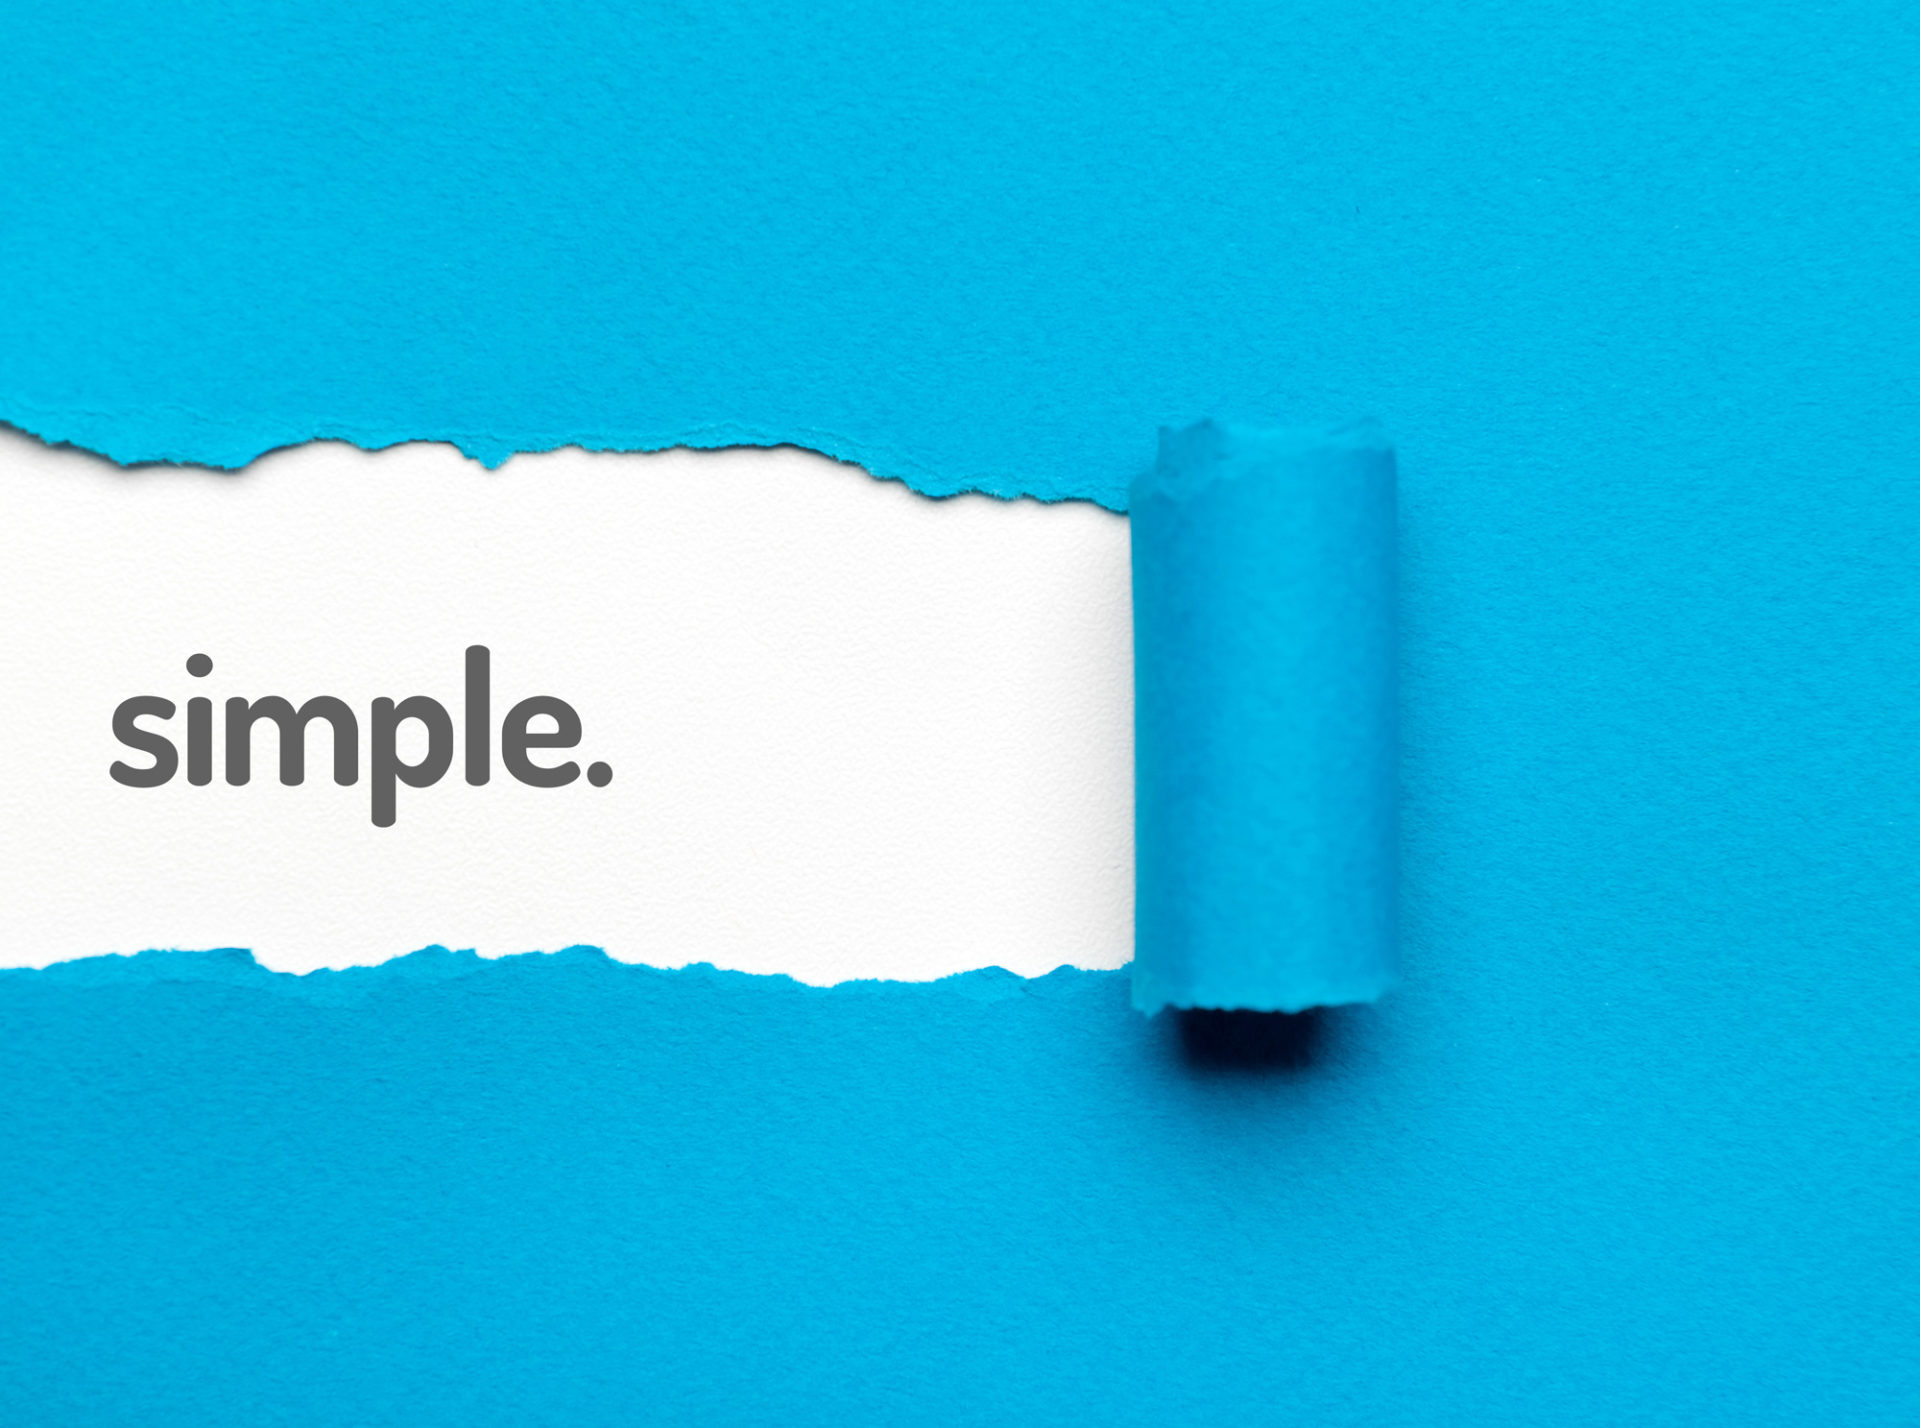 Blue paper tears away in a strip to reveal the word "simple"